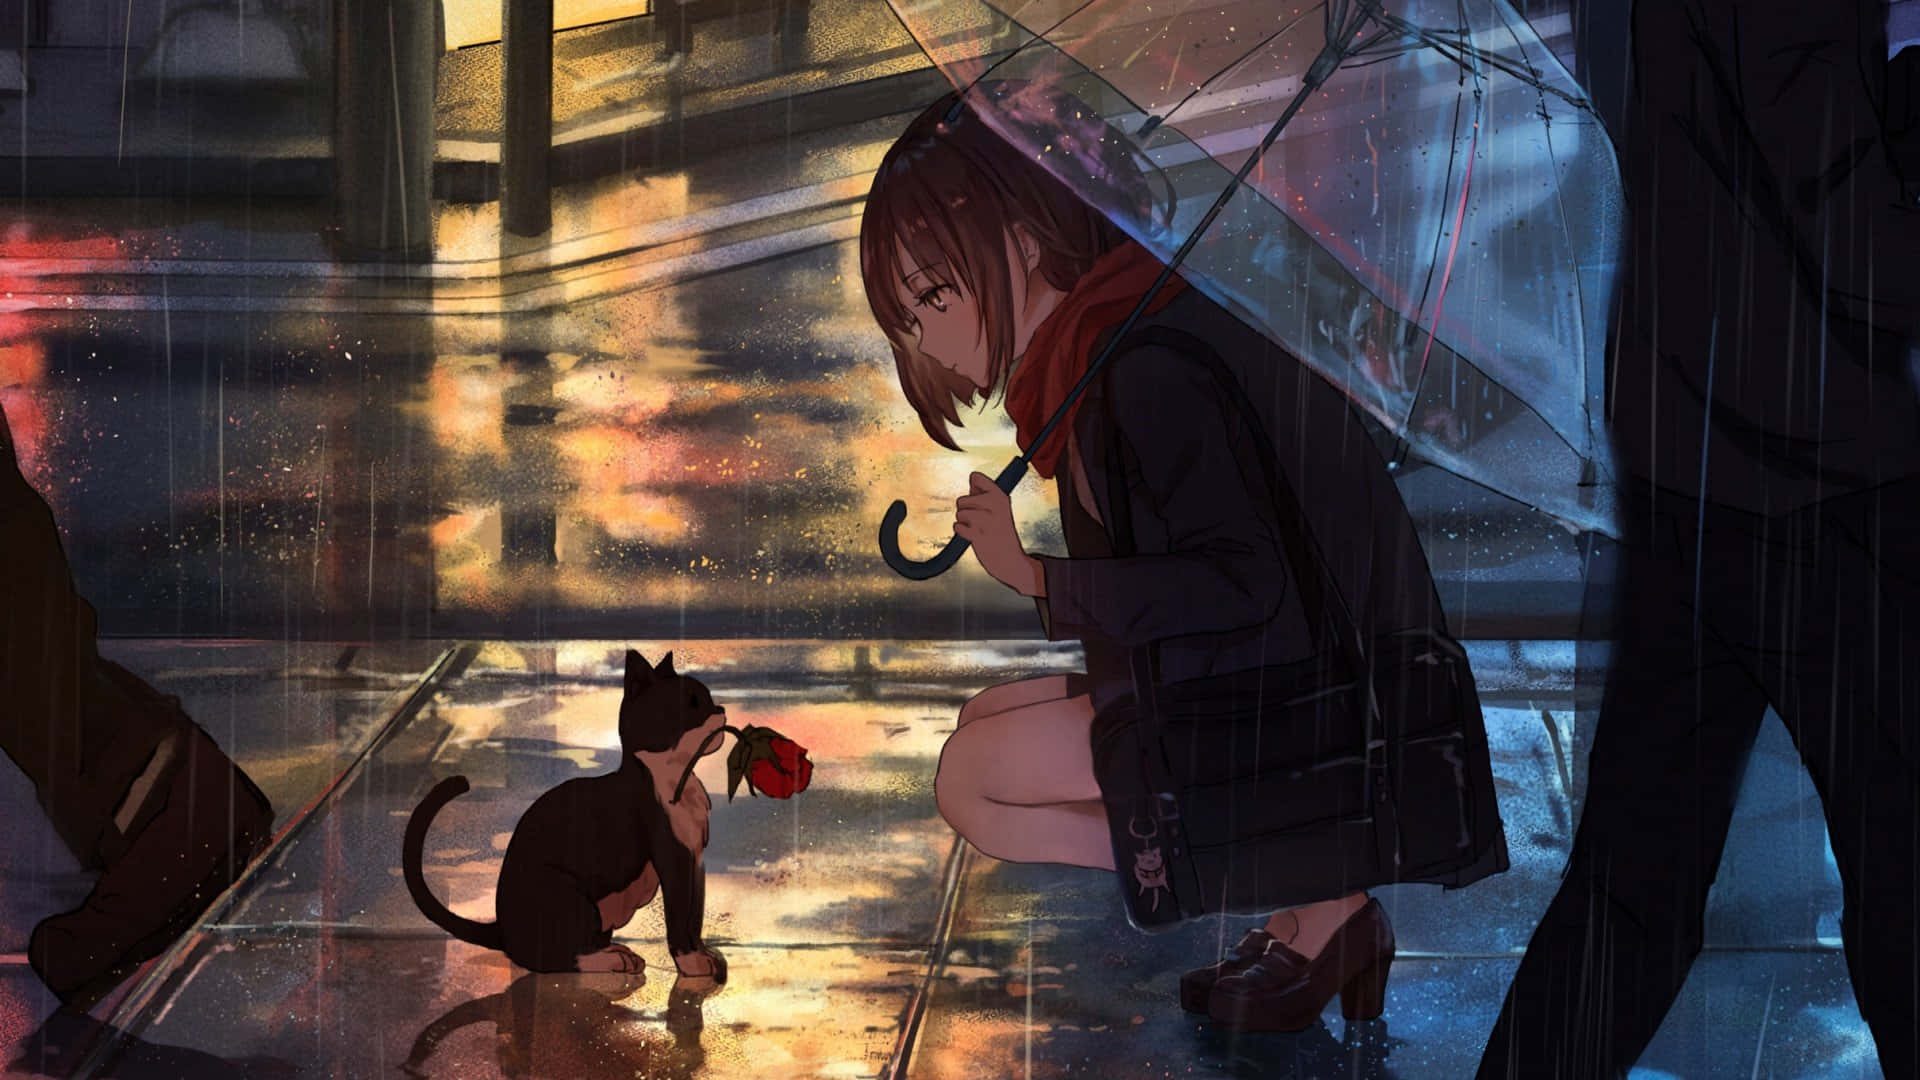 Get Lost In The Beauty Of A Rainy Anime Day